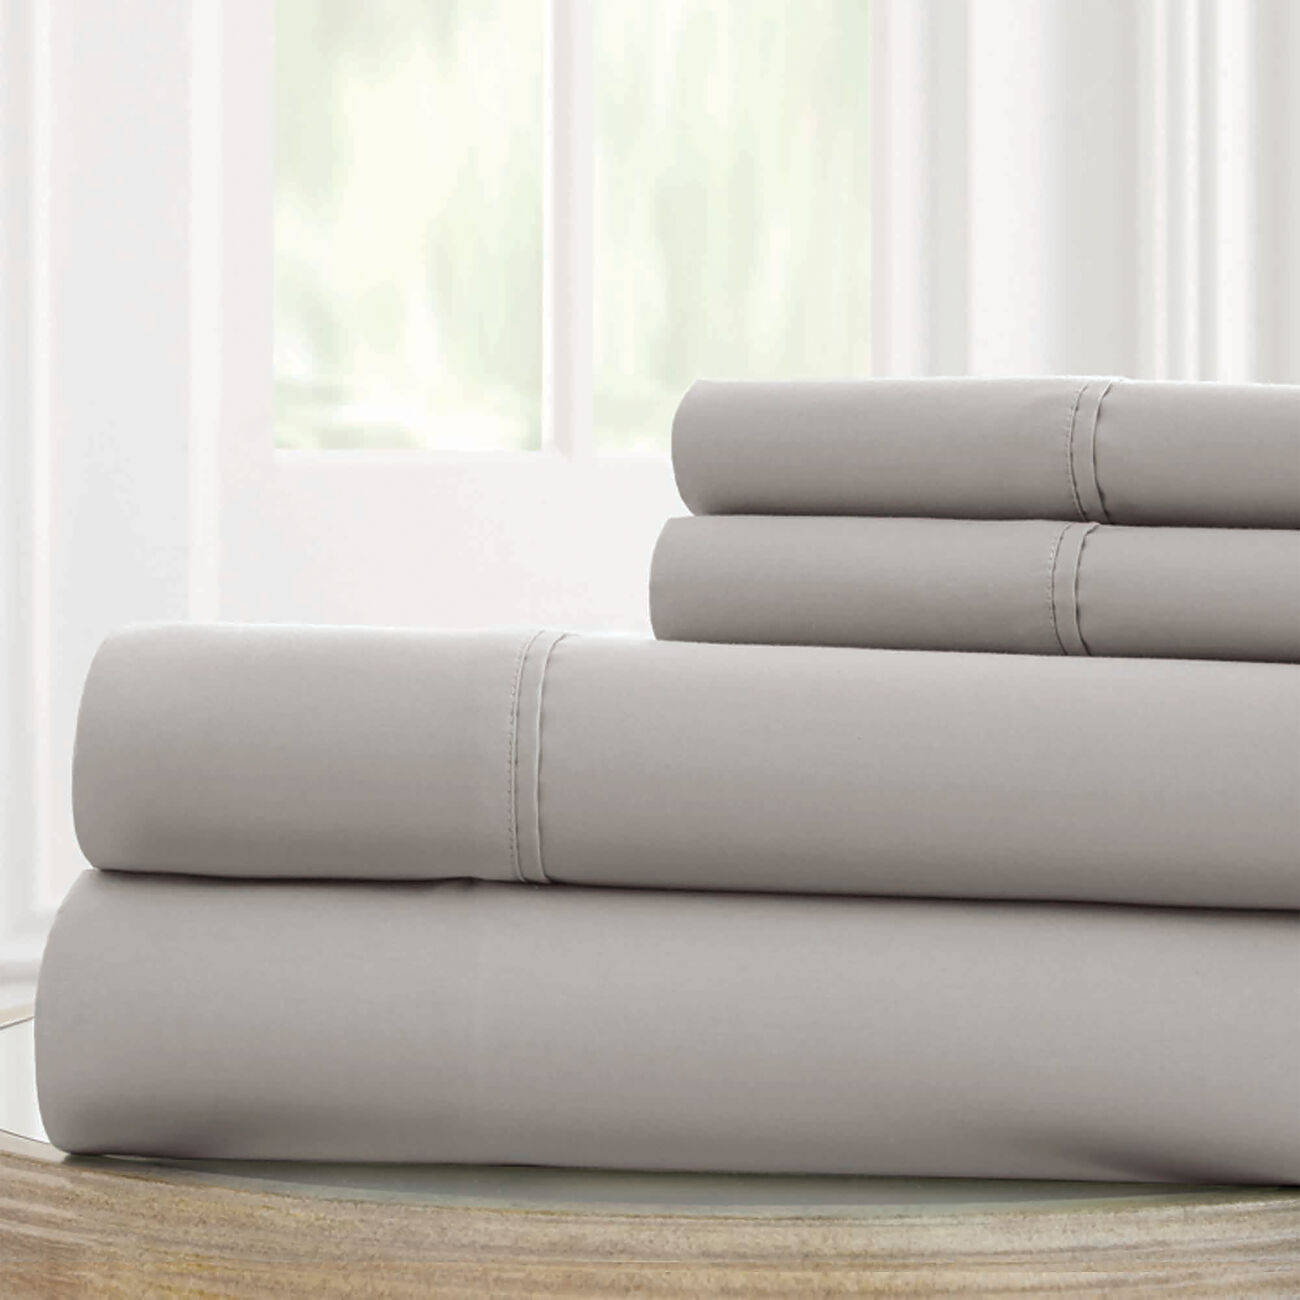 Bezons 4 Piece King Size Microfiber Sheet Set with 1800 Thread Count, Gray